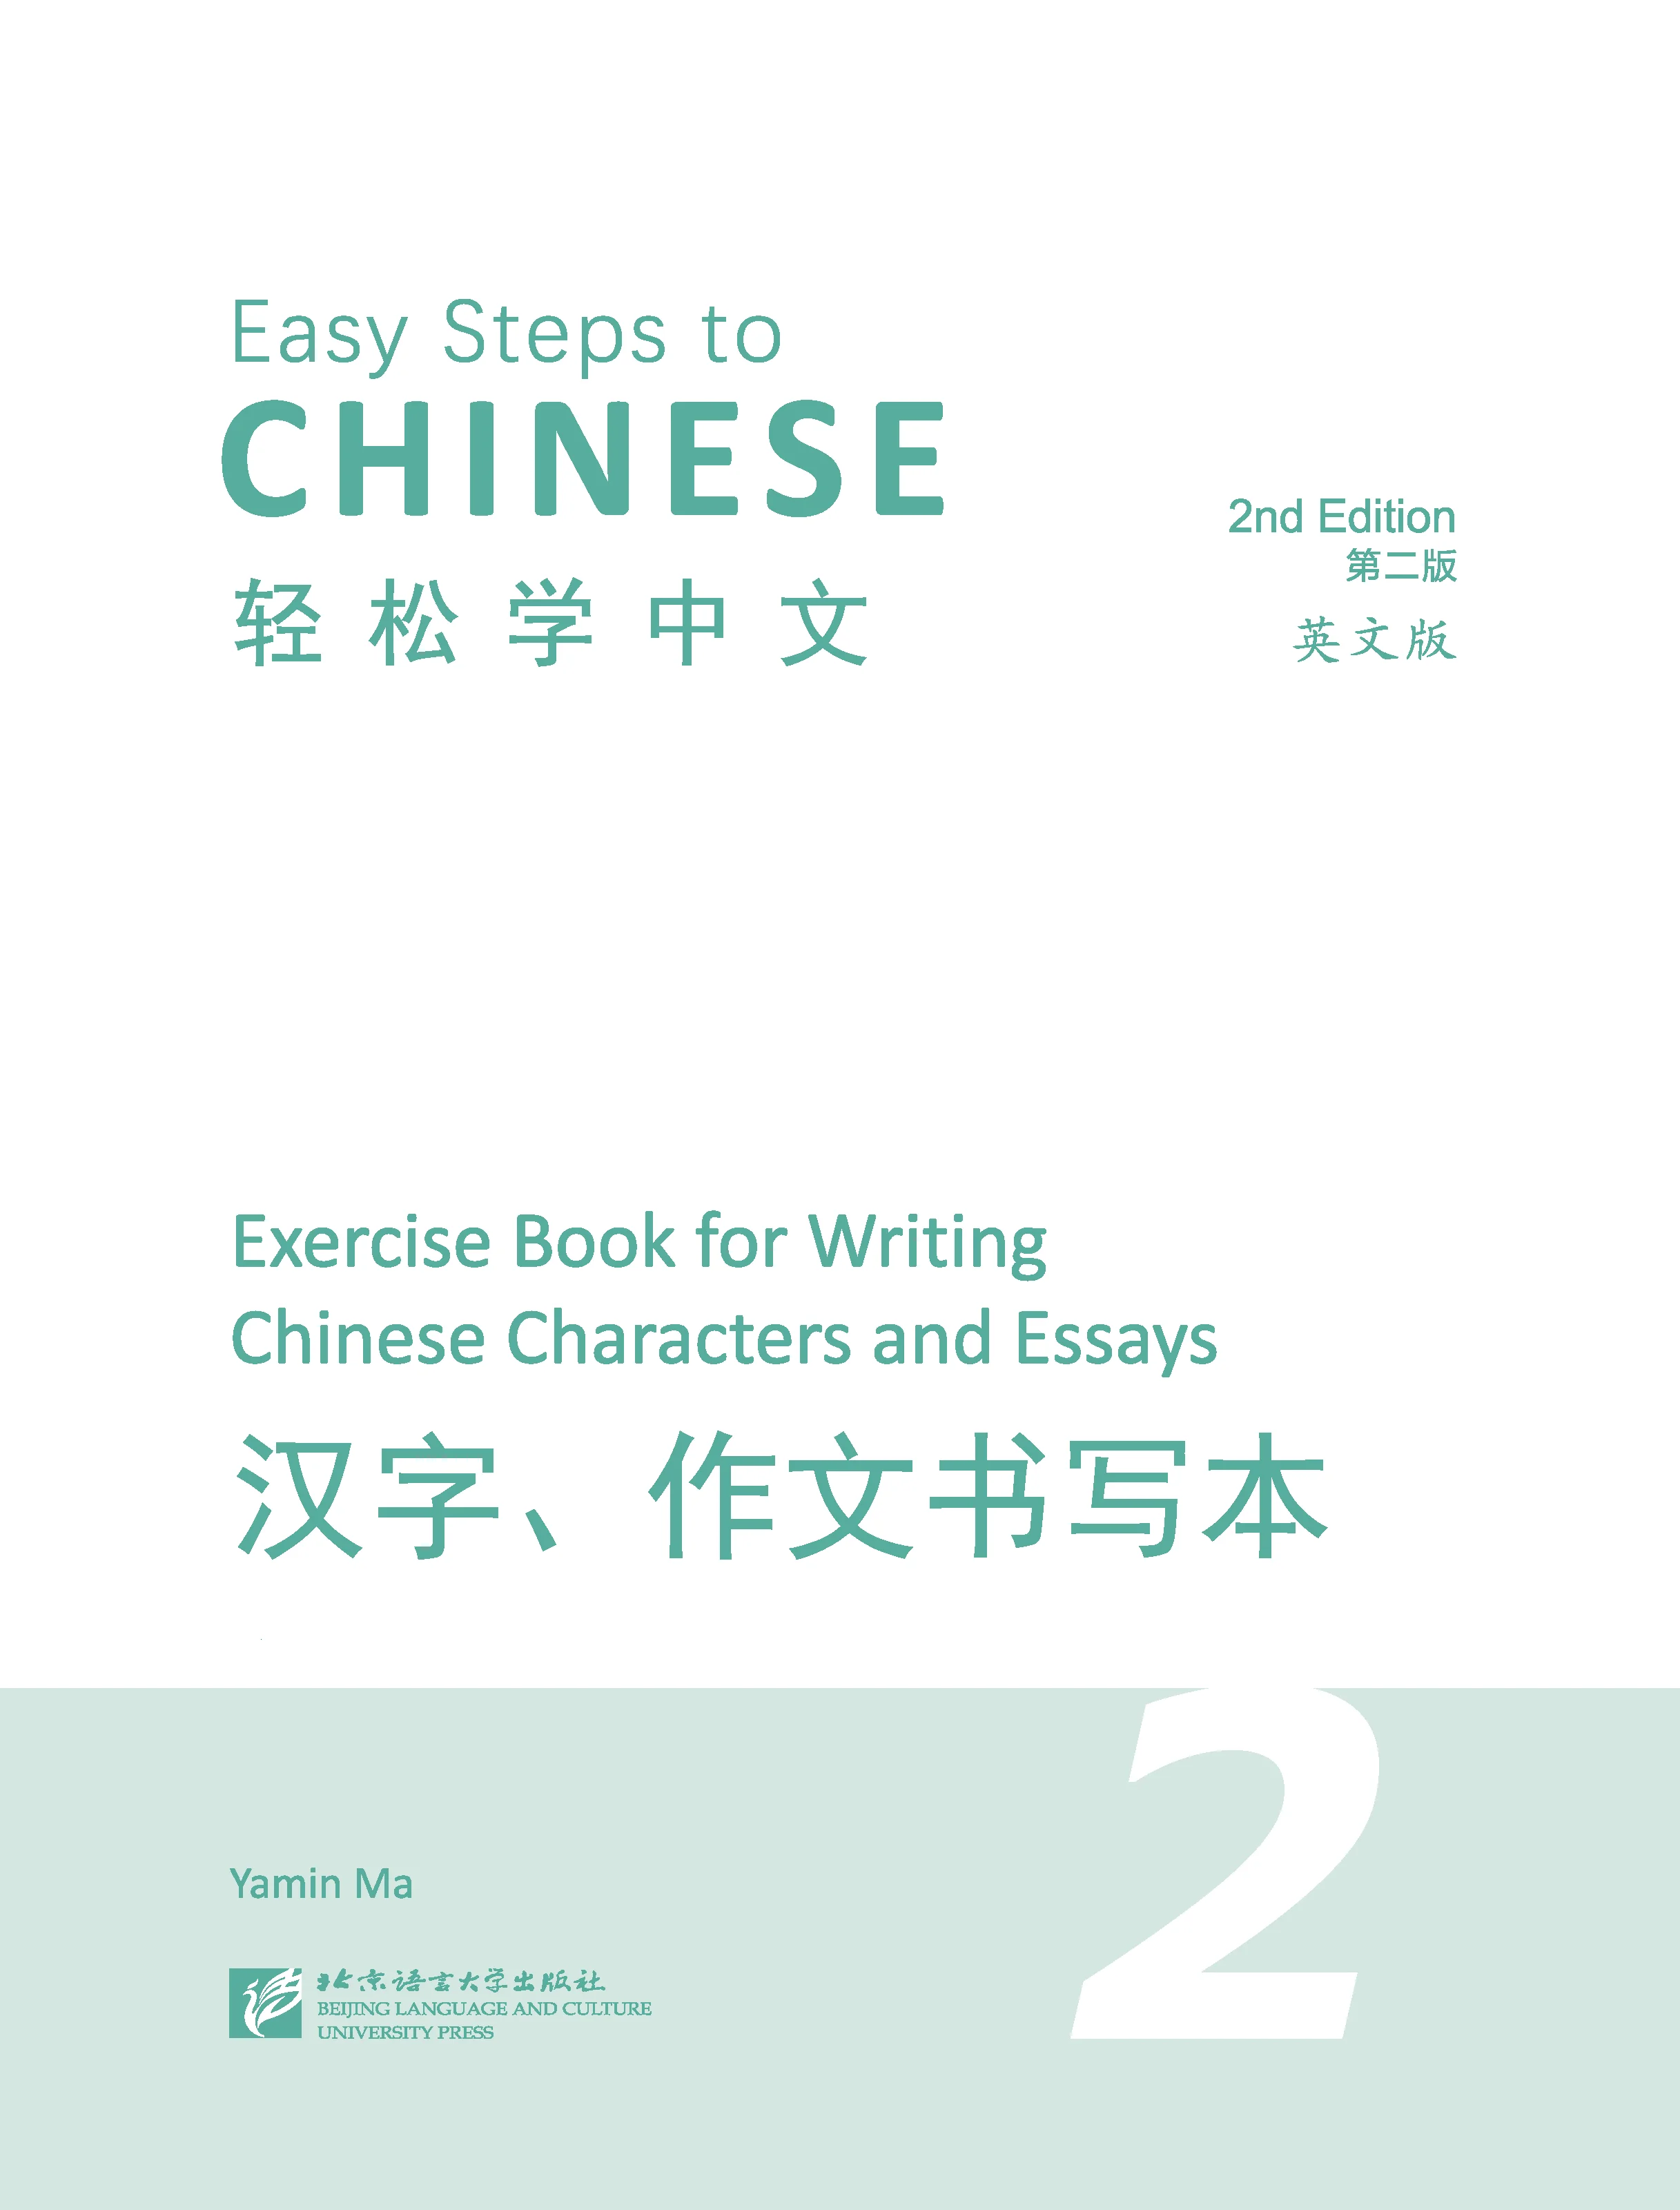 Exercise　Book　Chinese　for　and　Writing　Easy　Chinese　AliExpress　Steps　(2nd　Characters　to　Edition)　Essays